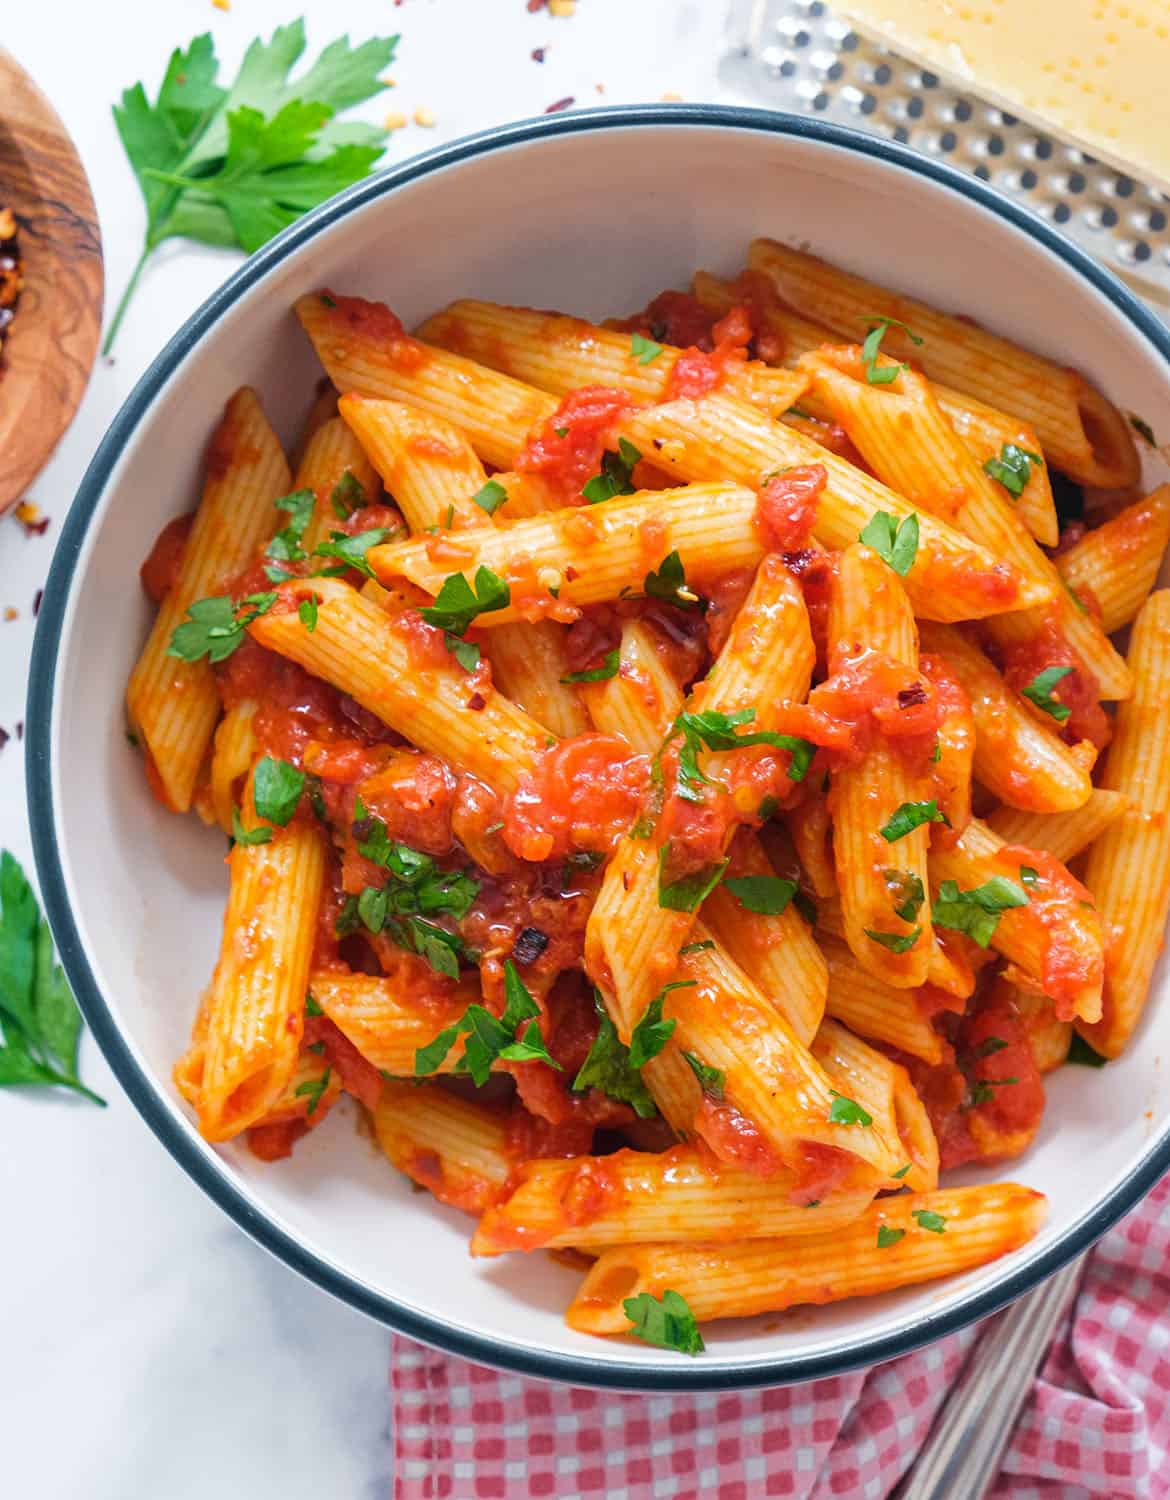 Penne Arrabbiata, easy & quick! - The clever meal